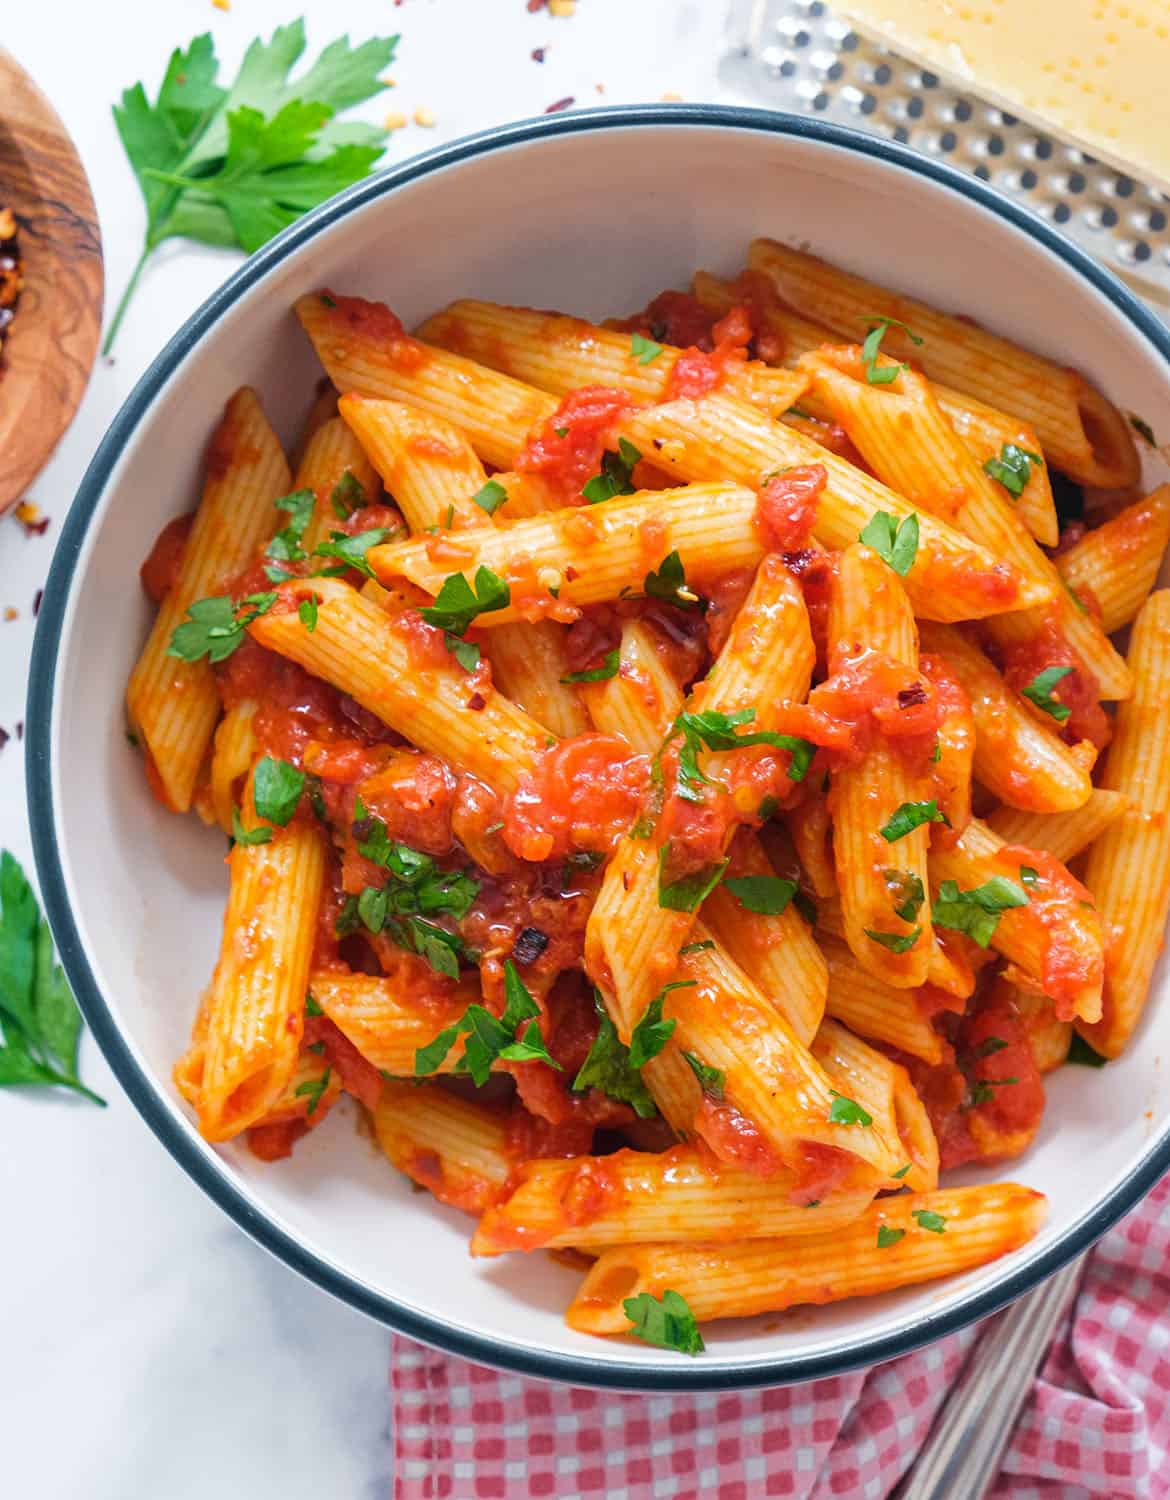 Penne Arrabbiata, easy & quick! - The clever meal